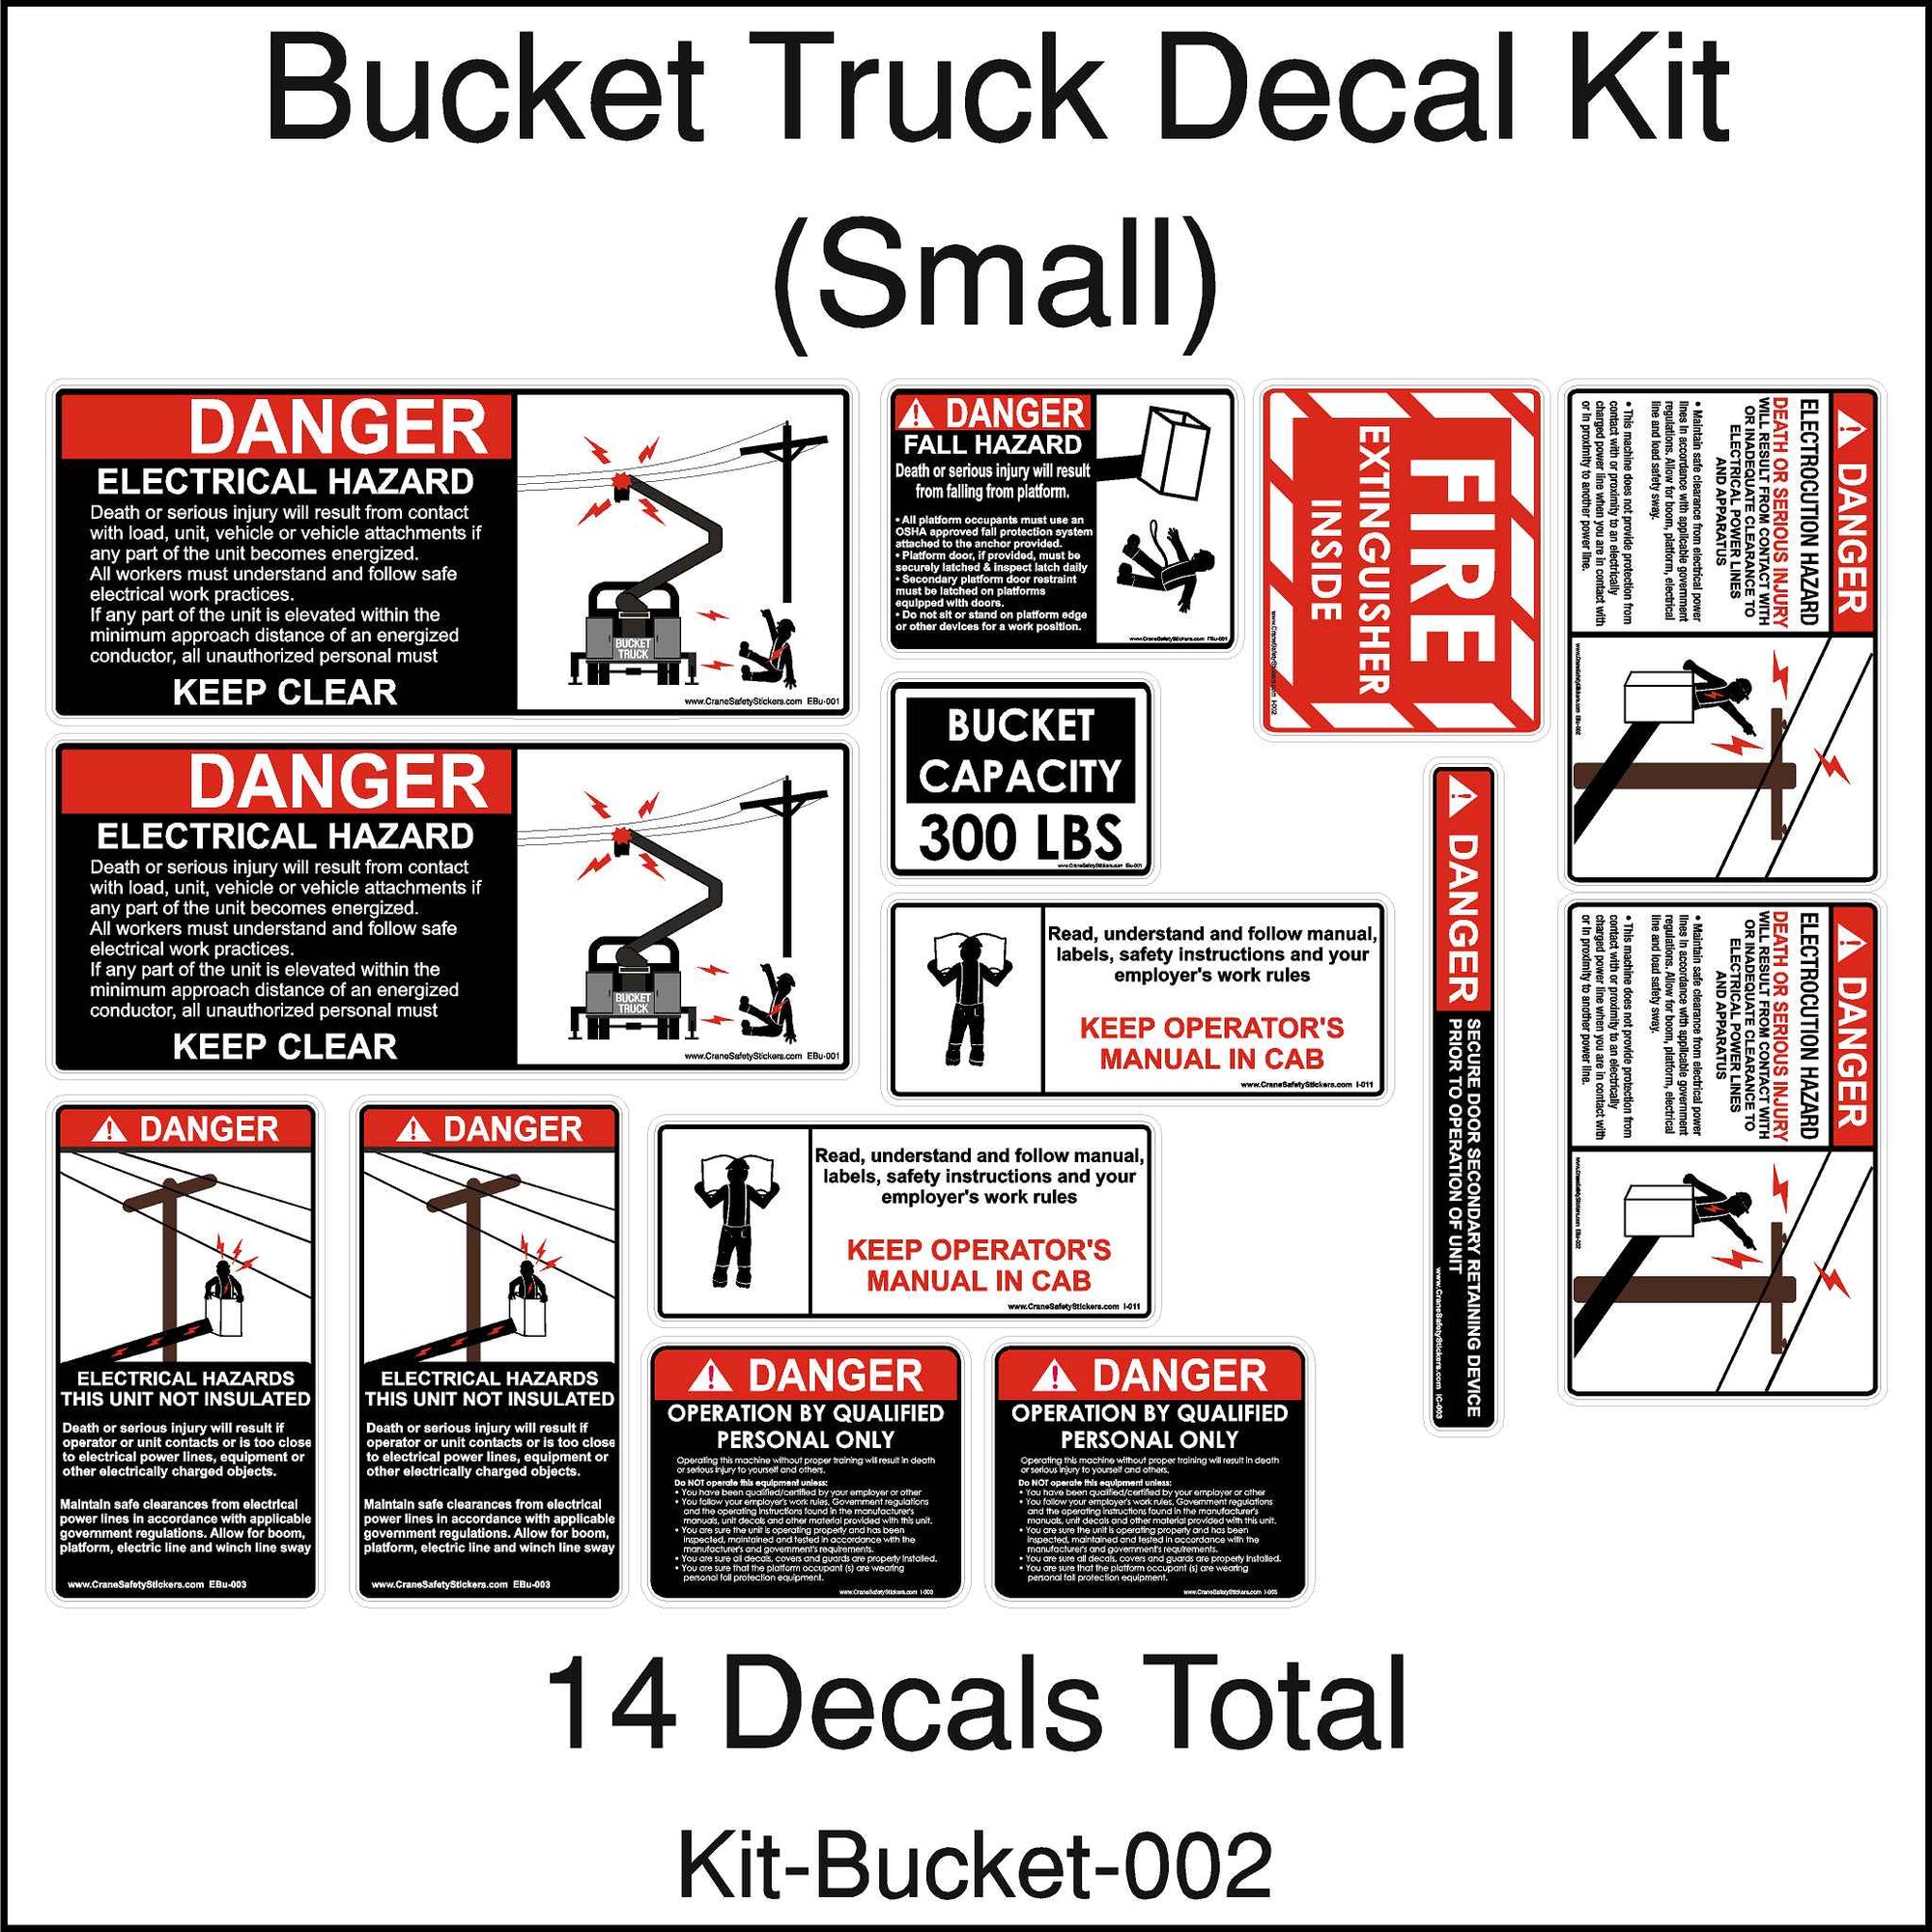 14 piece small bucket truck sticker kit. This kit includes all sticker for a small bucket truck. Each Sticker is printed in bright colors with the the correct danger header and pictural of the hazard being shown.